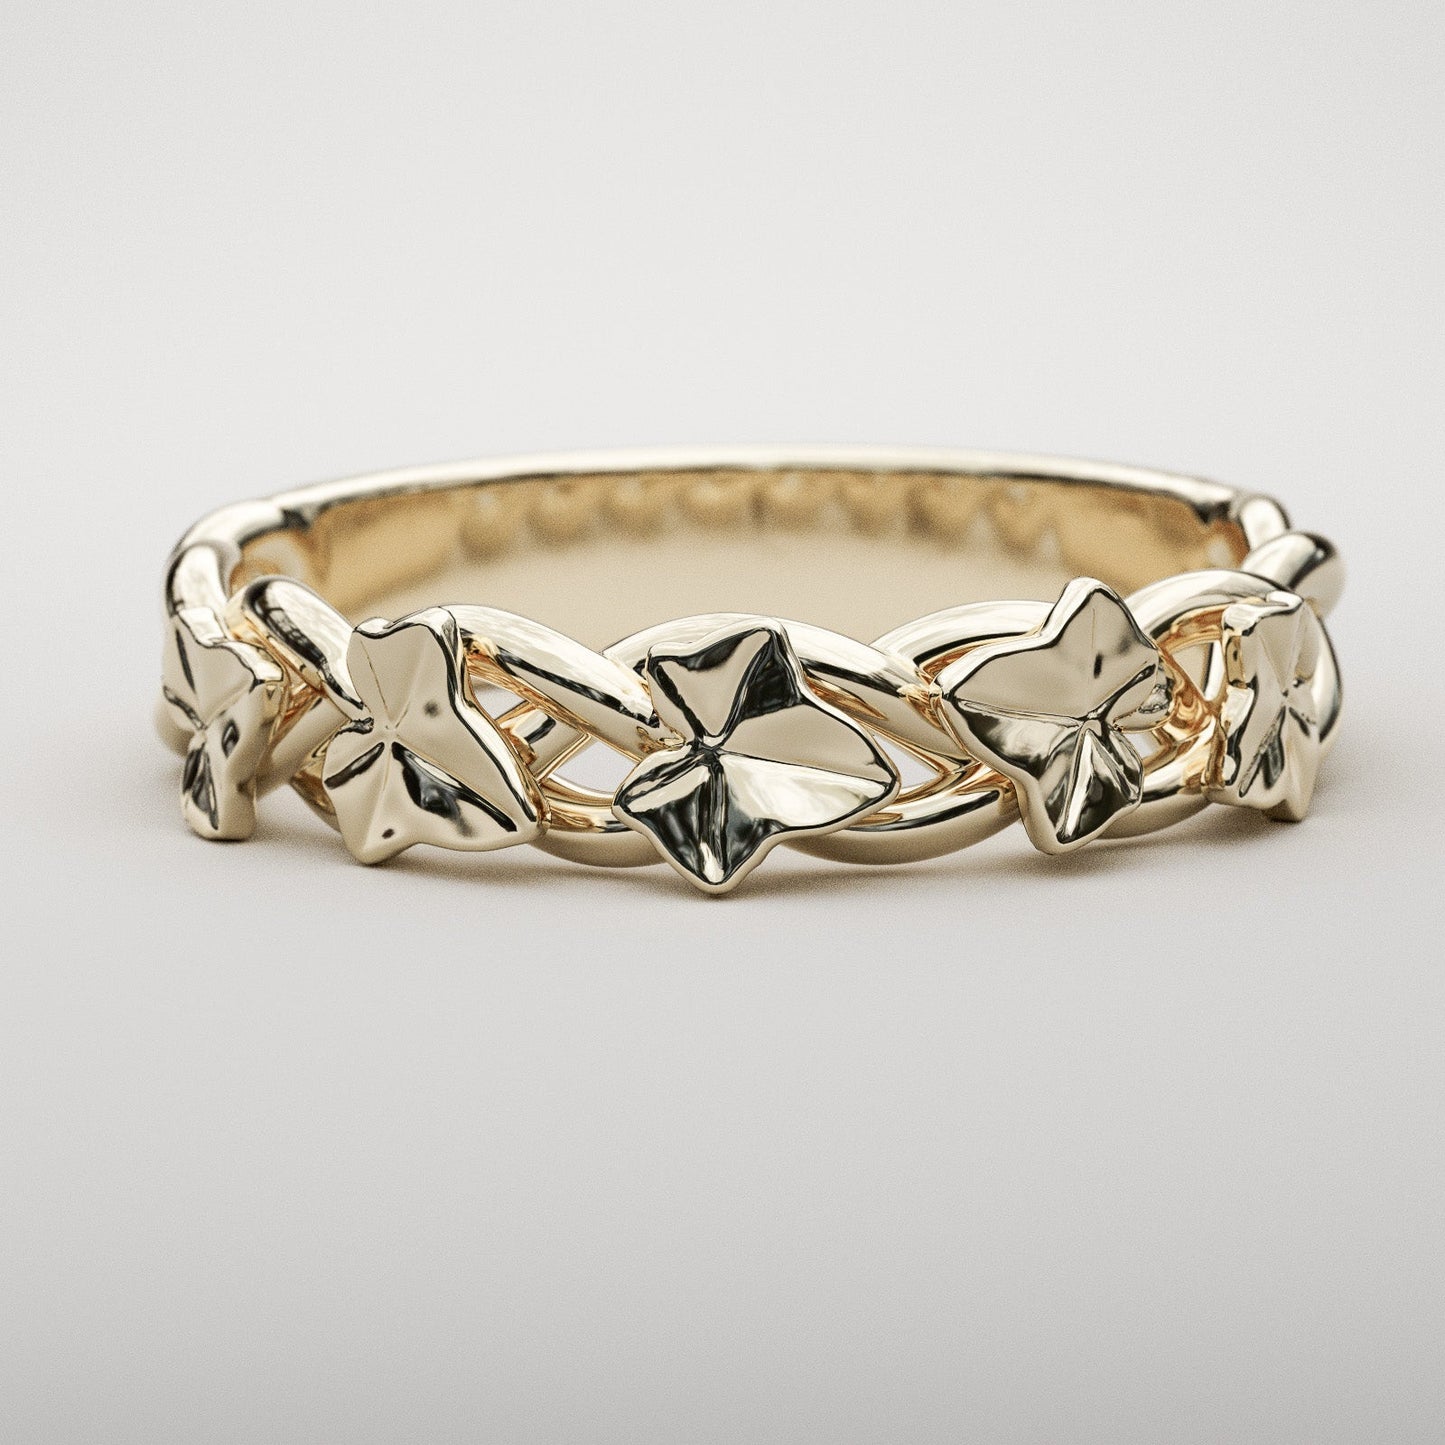 Woven Ivy leaf ring in yellow gold